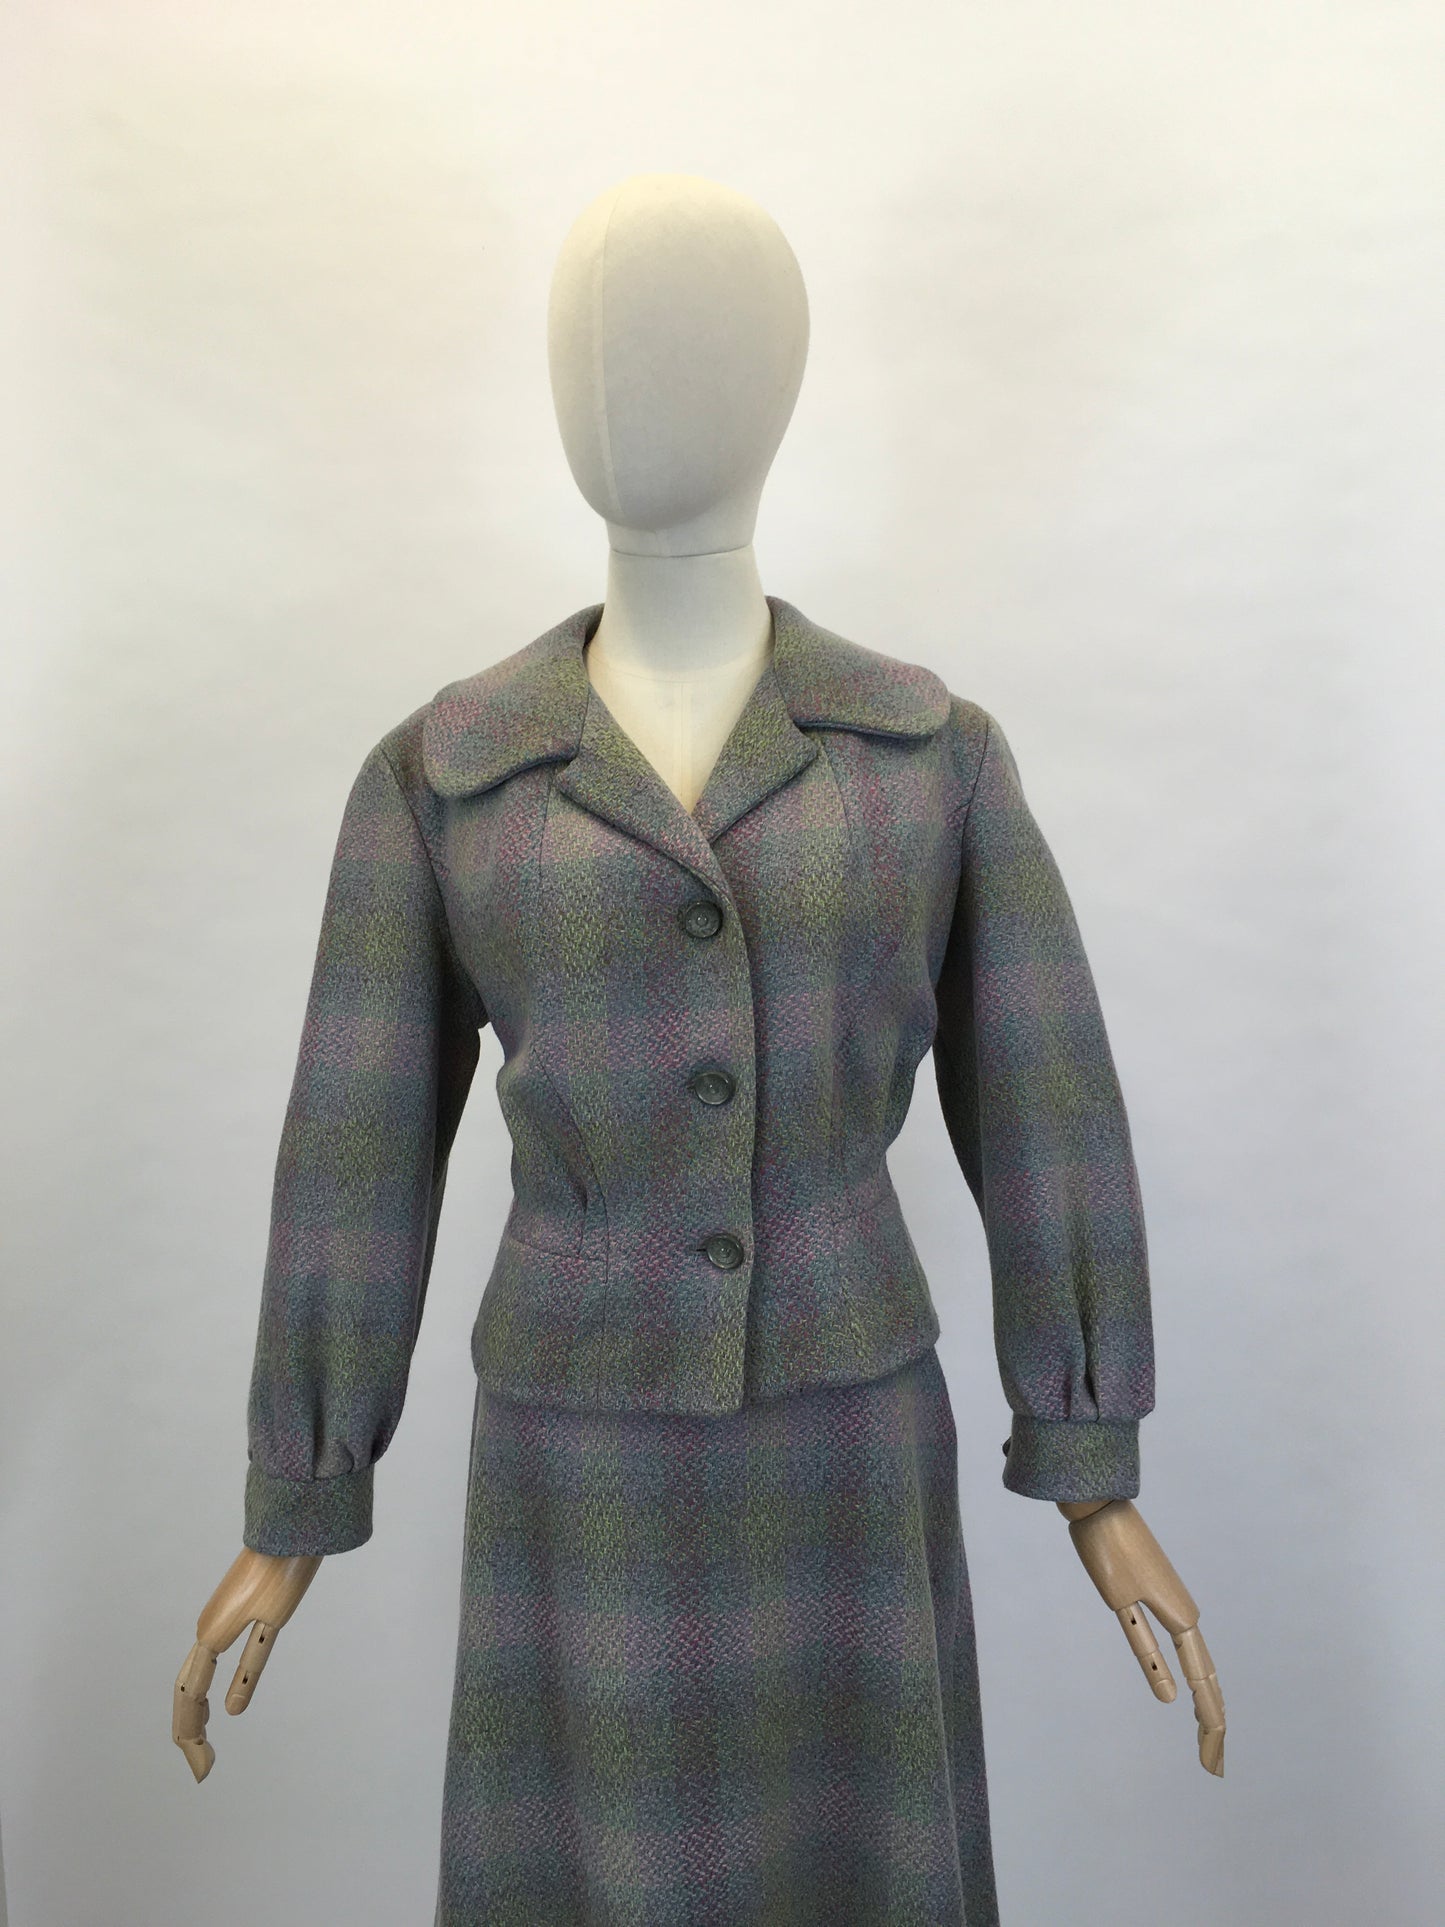 RESERVED DO NOT BUY - Original Early 1950’s 2pc Wool Suit - In A Lovely Springtime Colour Pallet